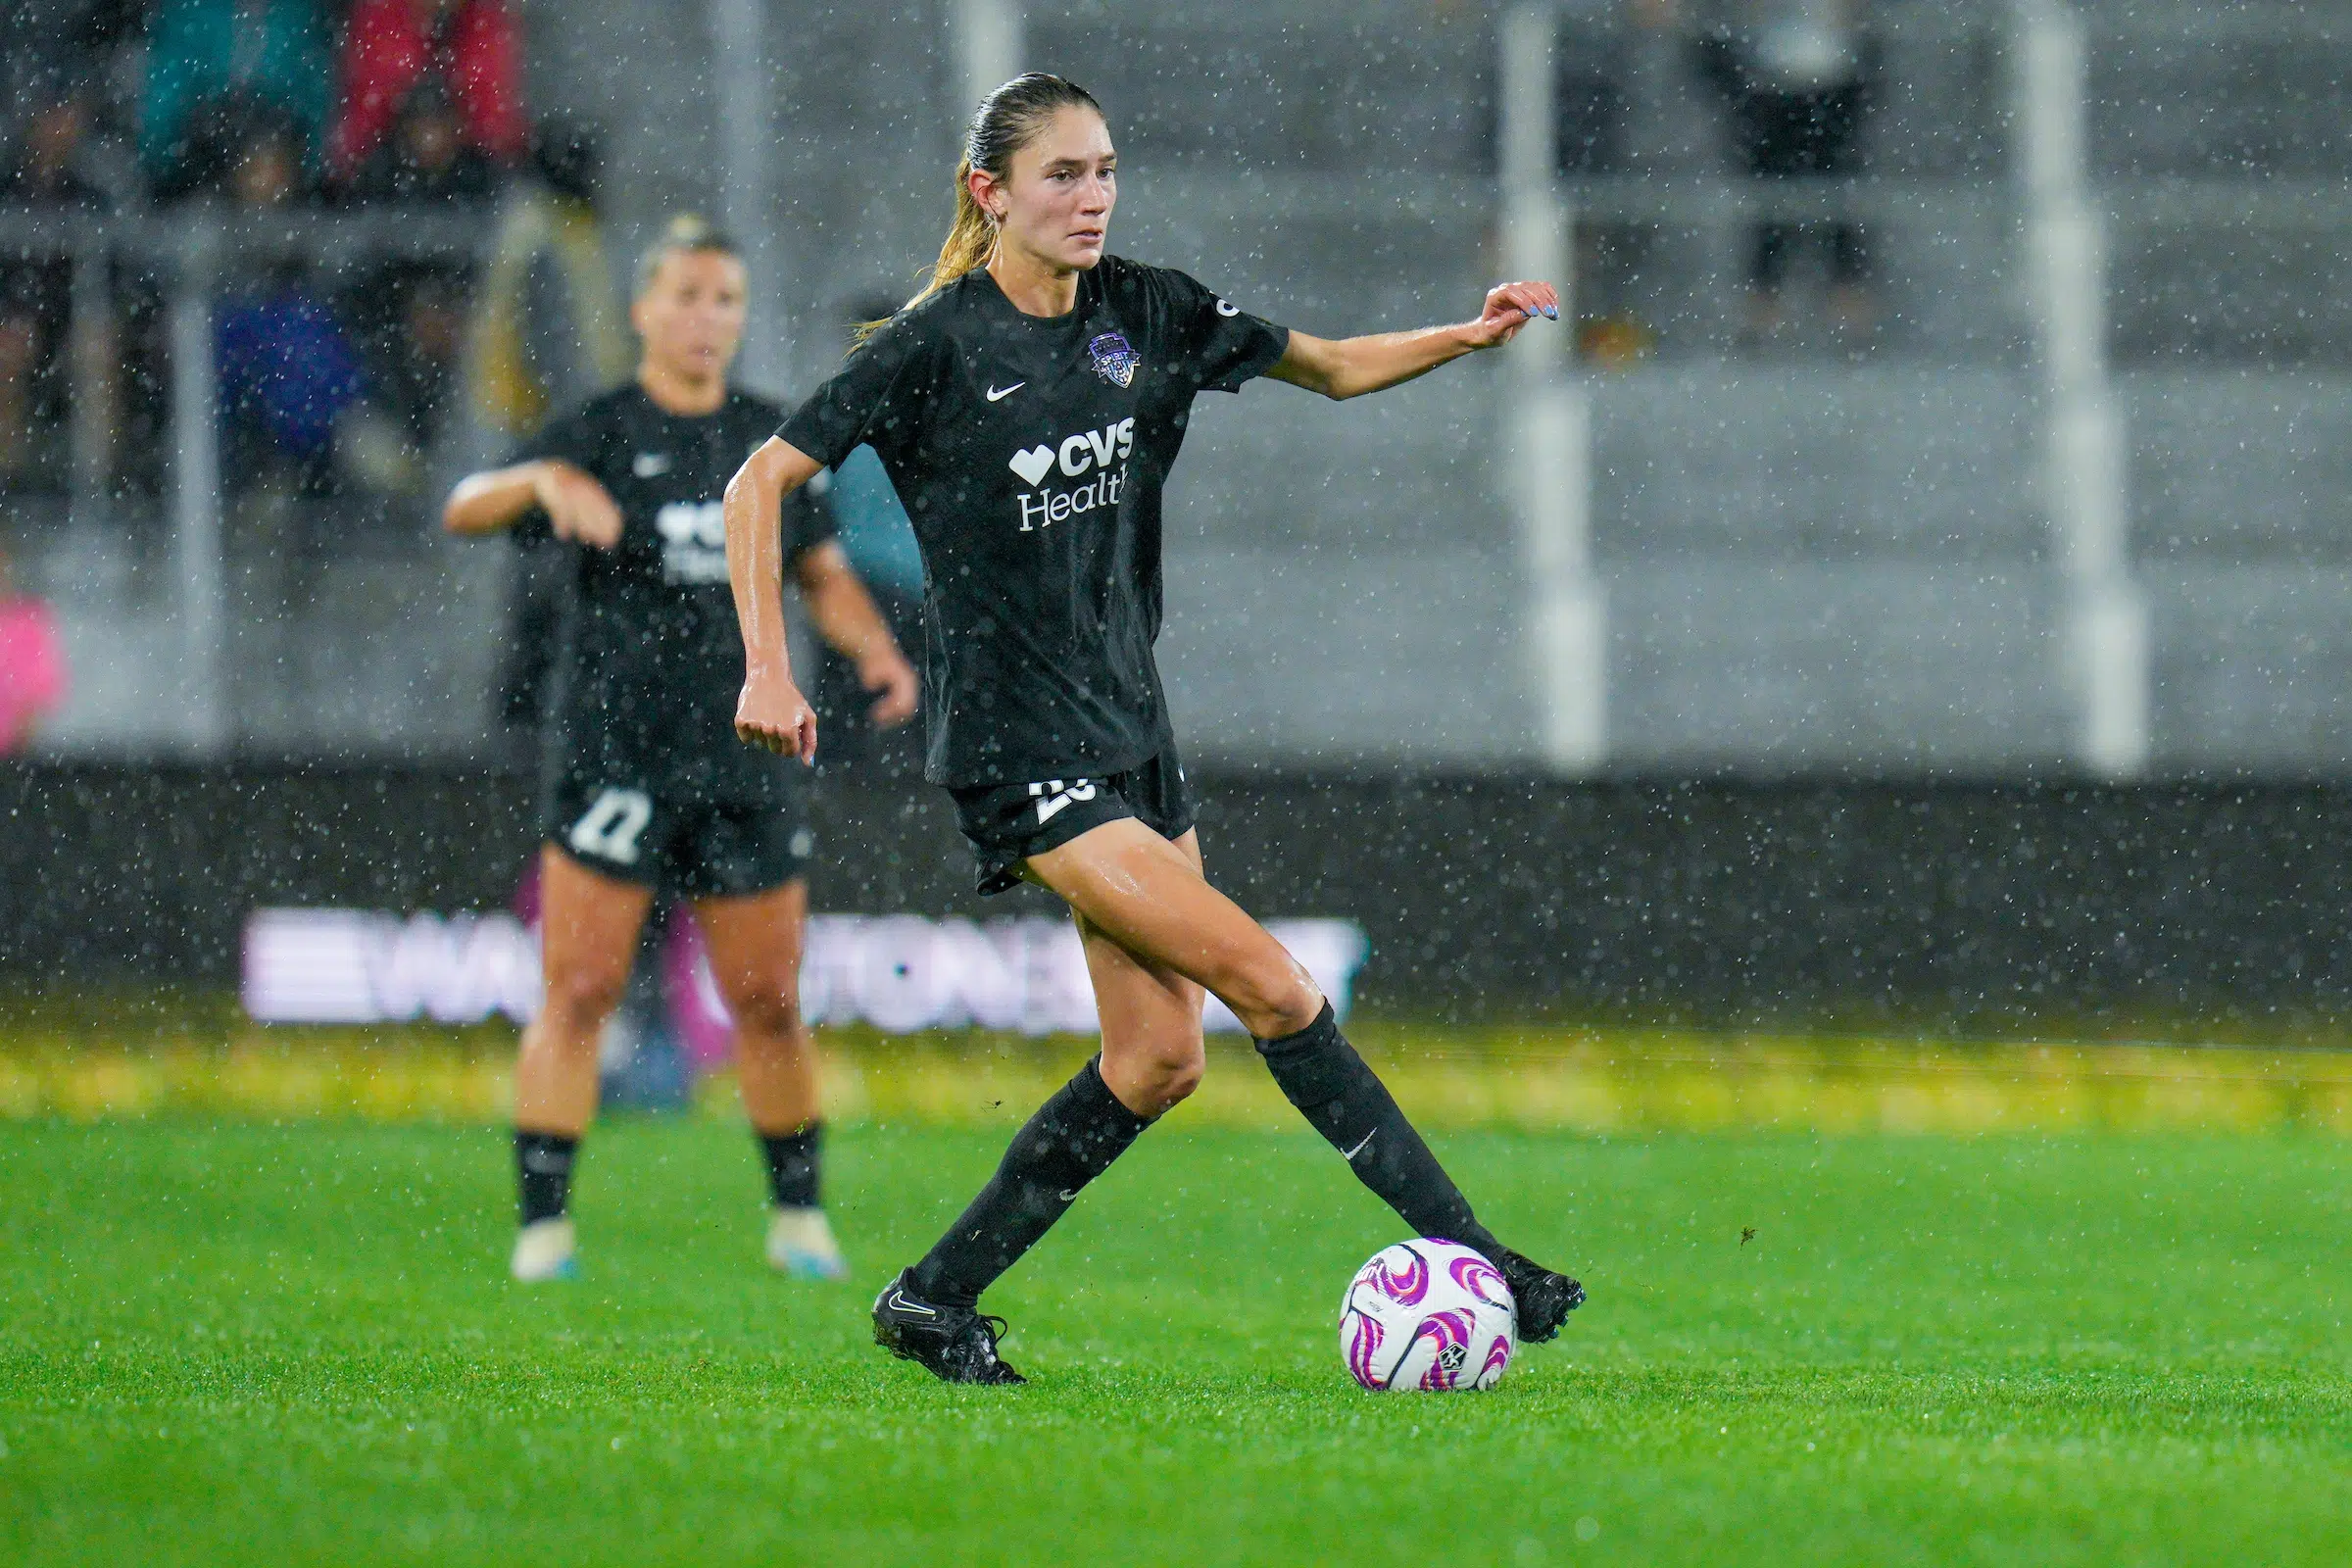 Paige Metayer in an all black uniform dribbles a soccer ball as rain pours down.